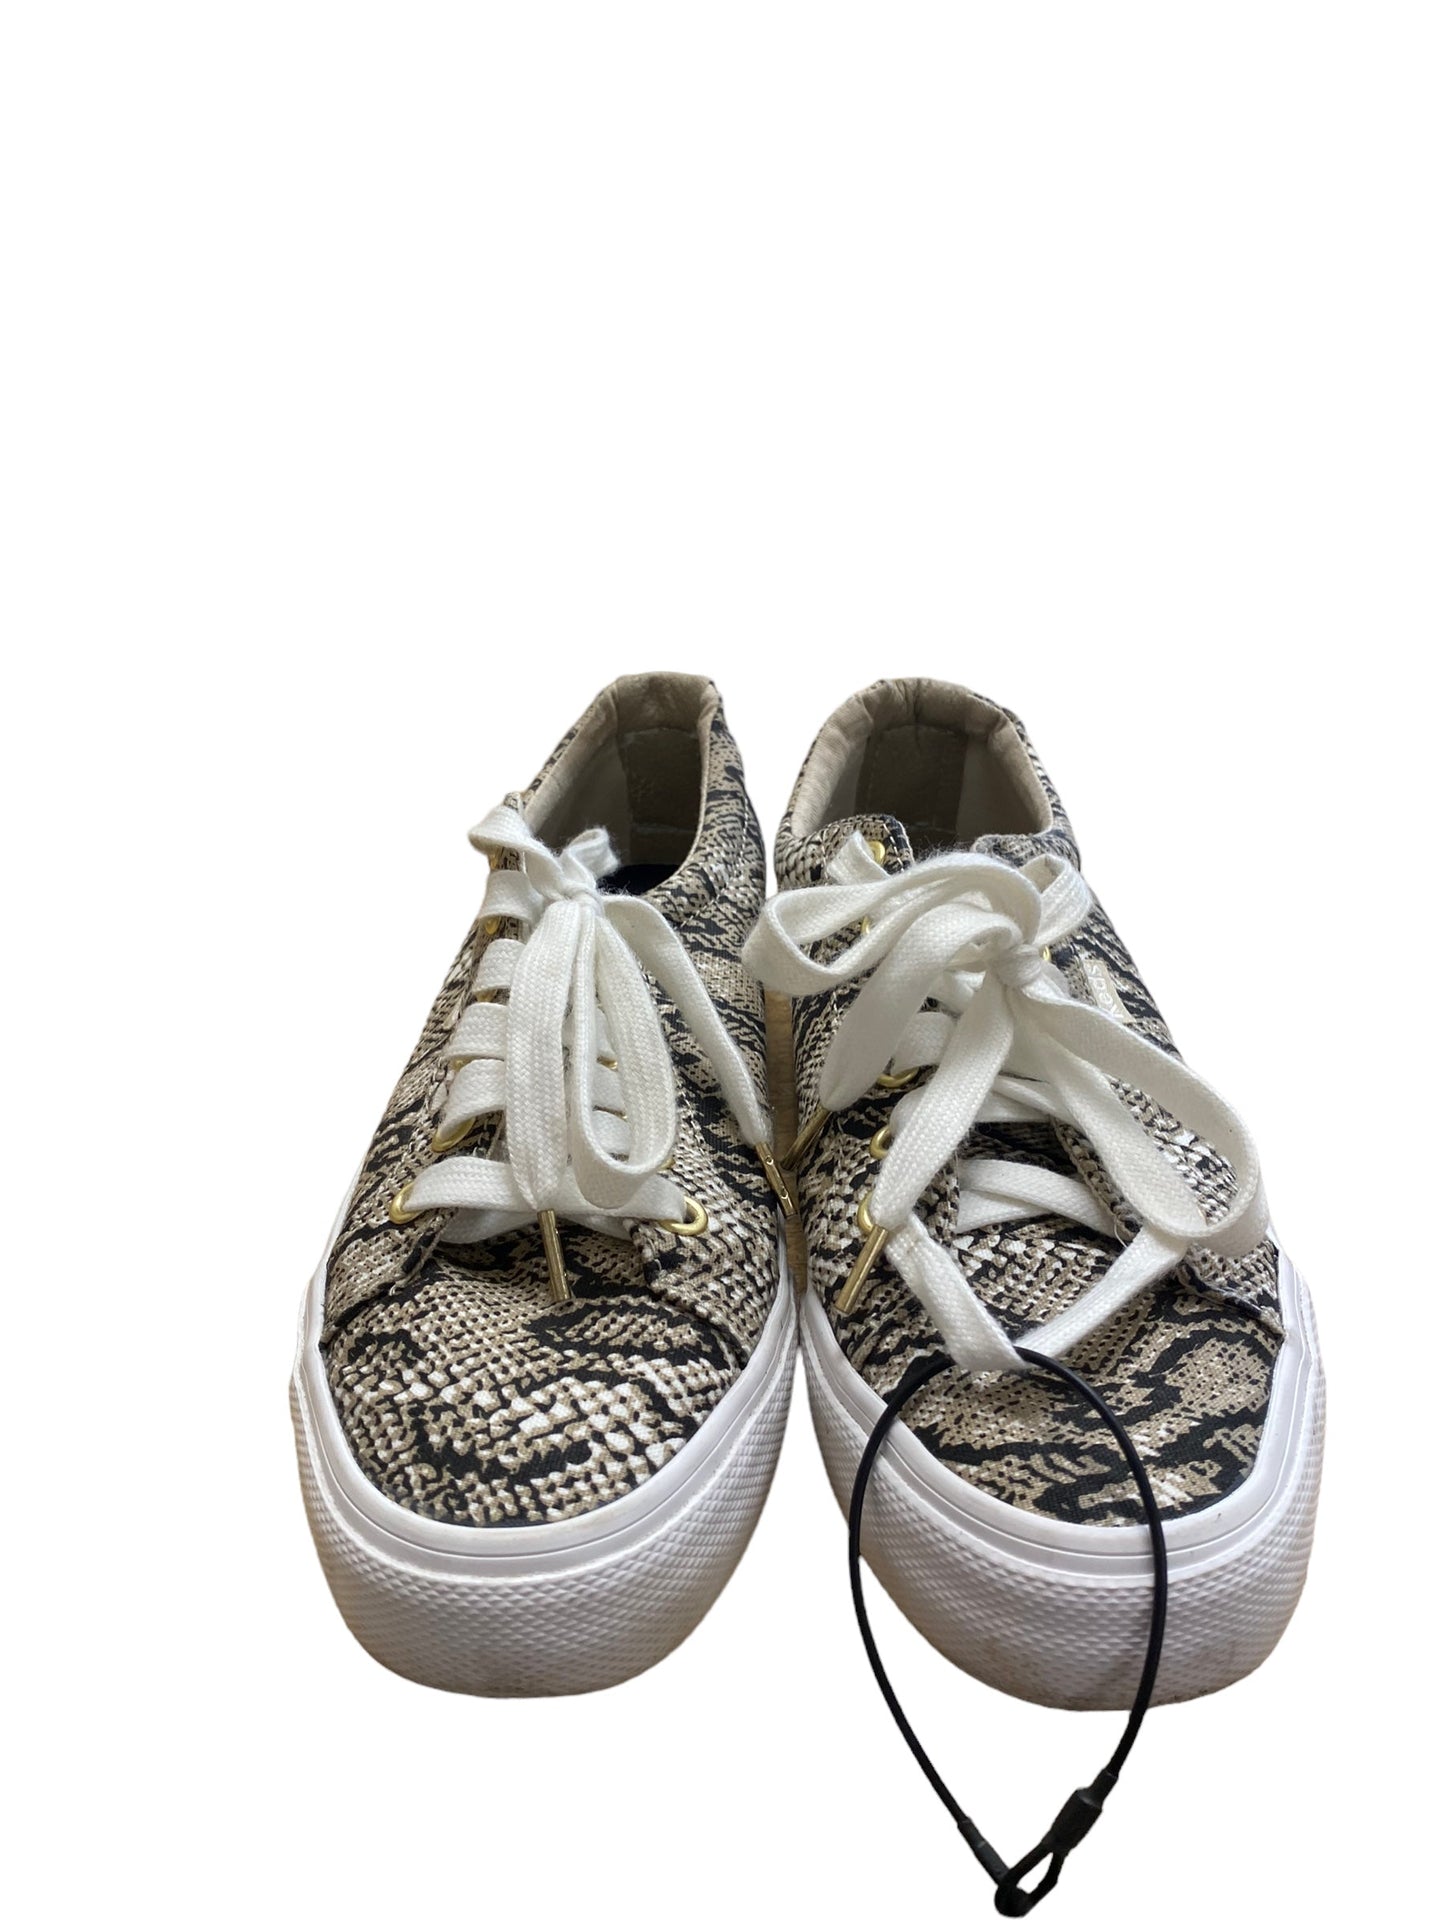 Shoes Flats By Keds  Size: 5.5